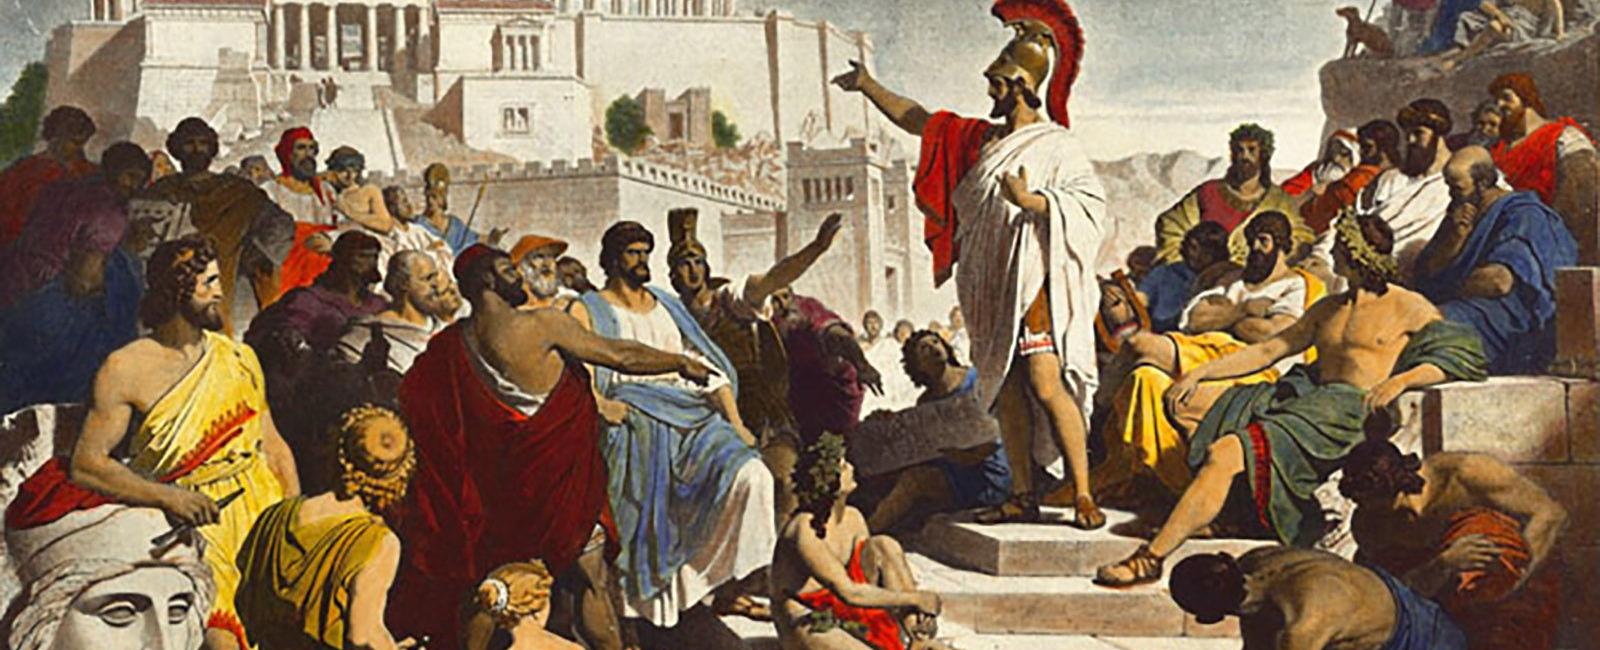 Ancient greek democracy the world s first lasted for only 185 years